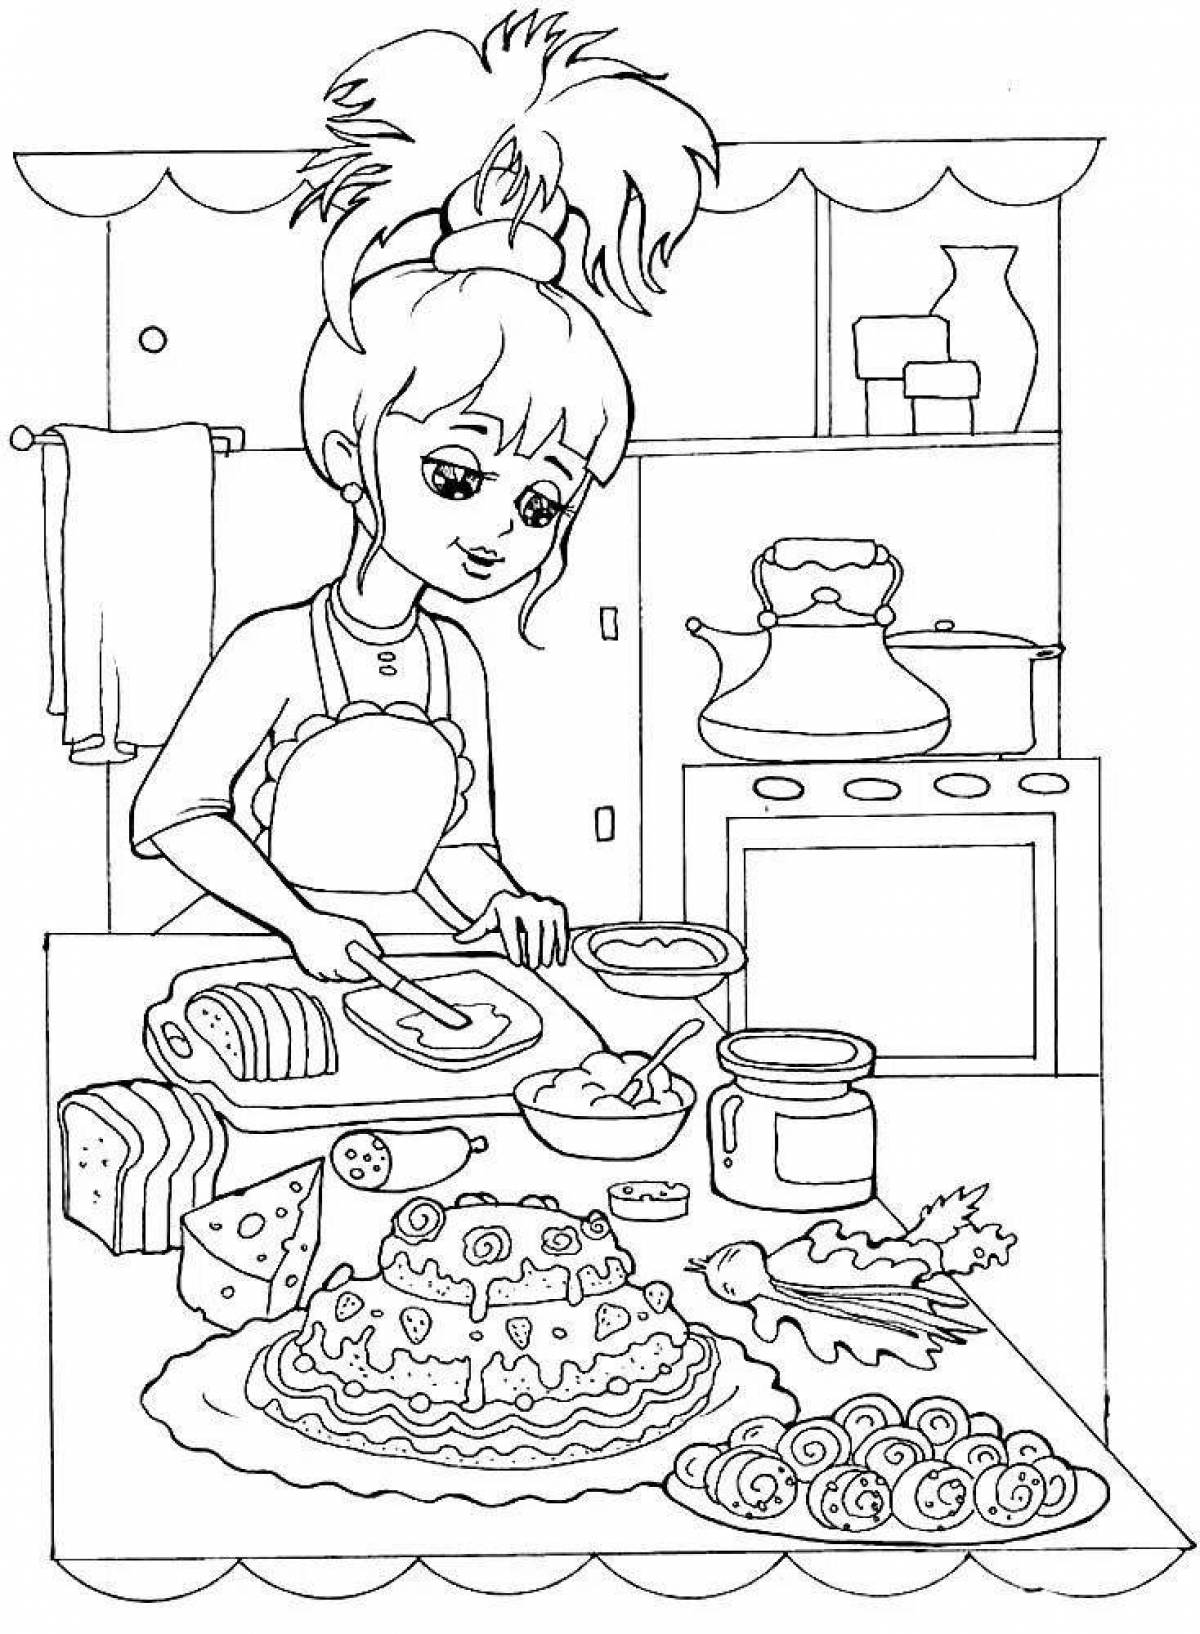 Wonderful magical kitchen coloring book